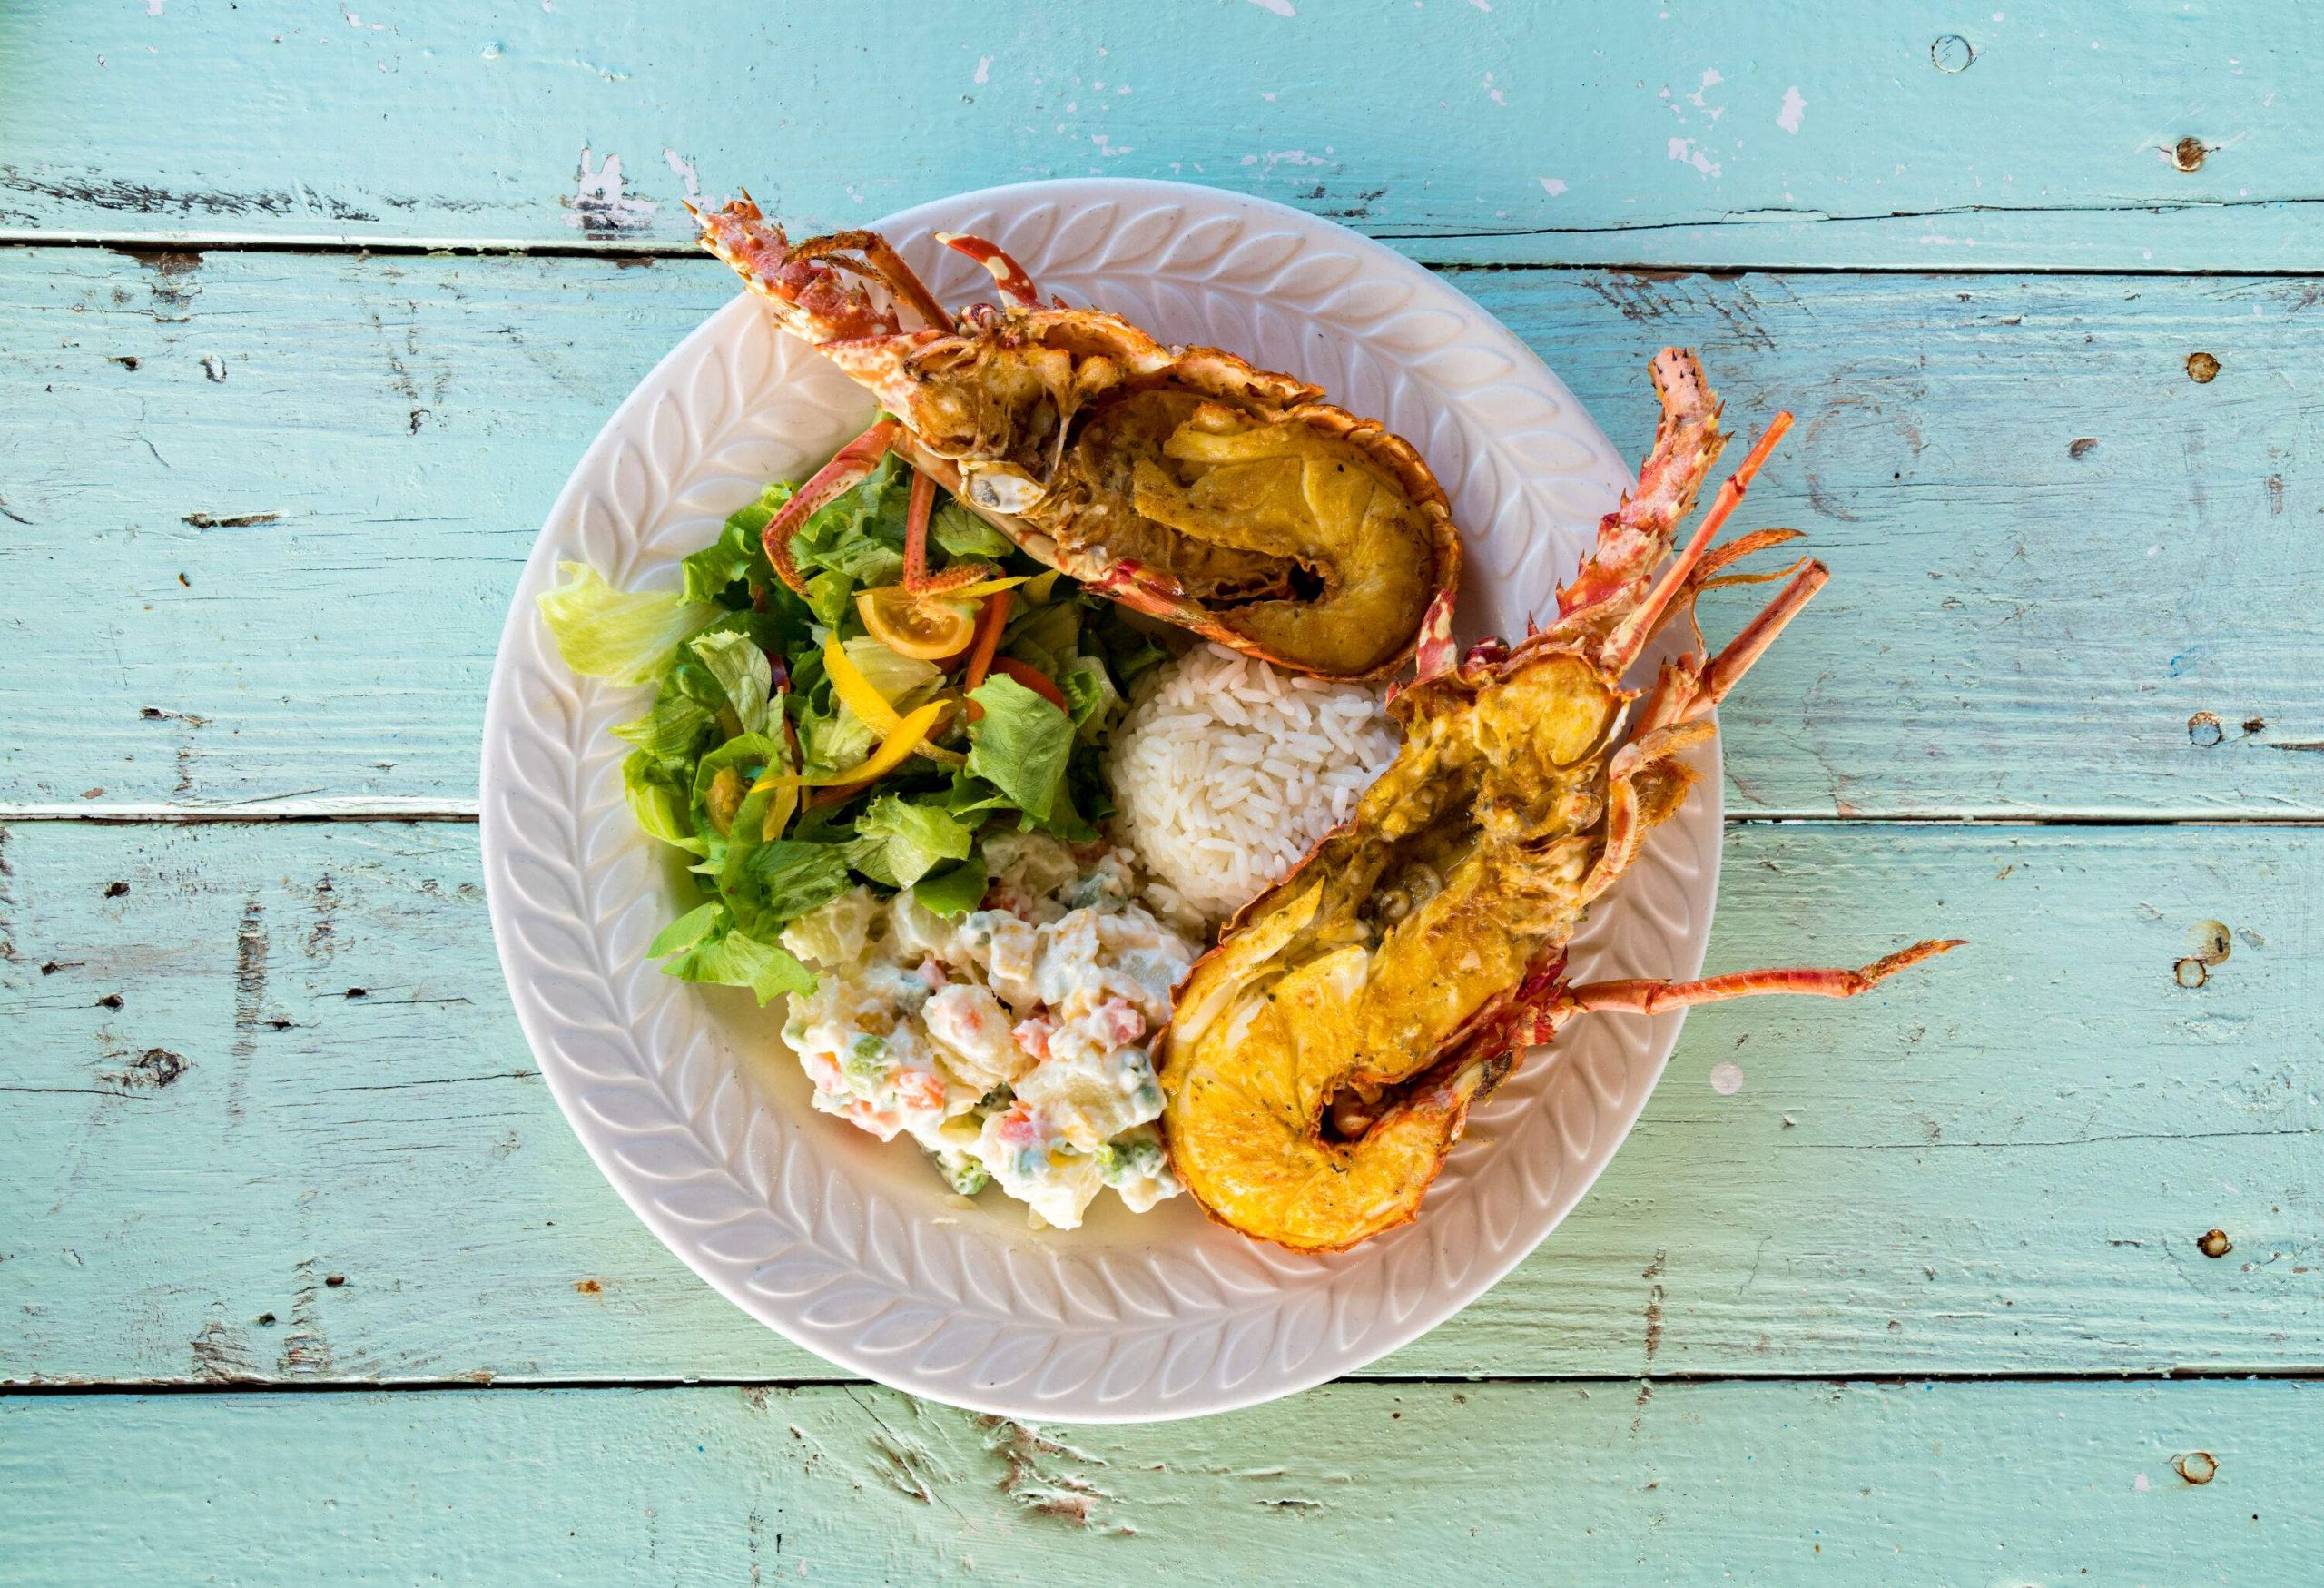 A hearty meal consisting of lobster, two varieties of salad, and white rice.